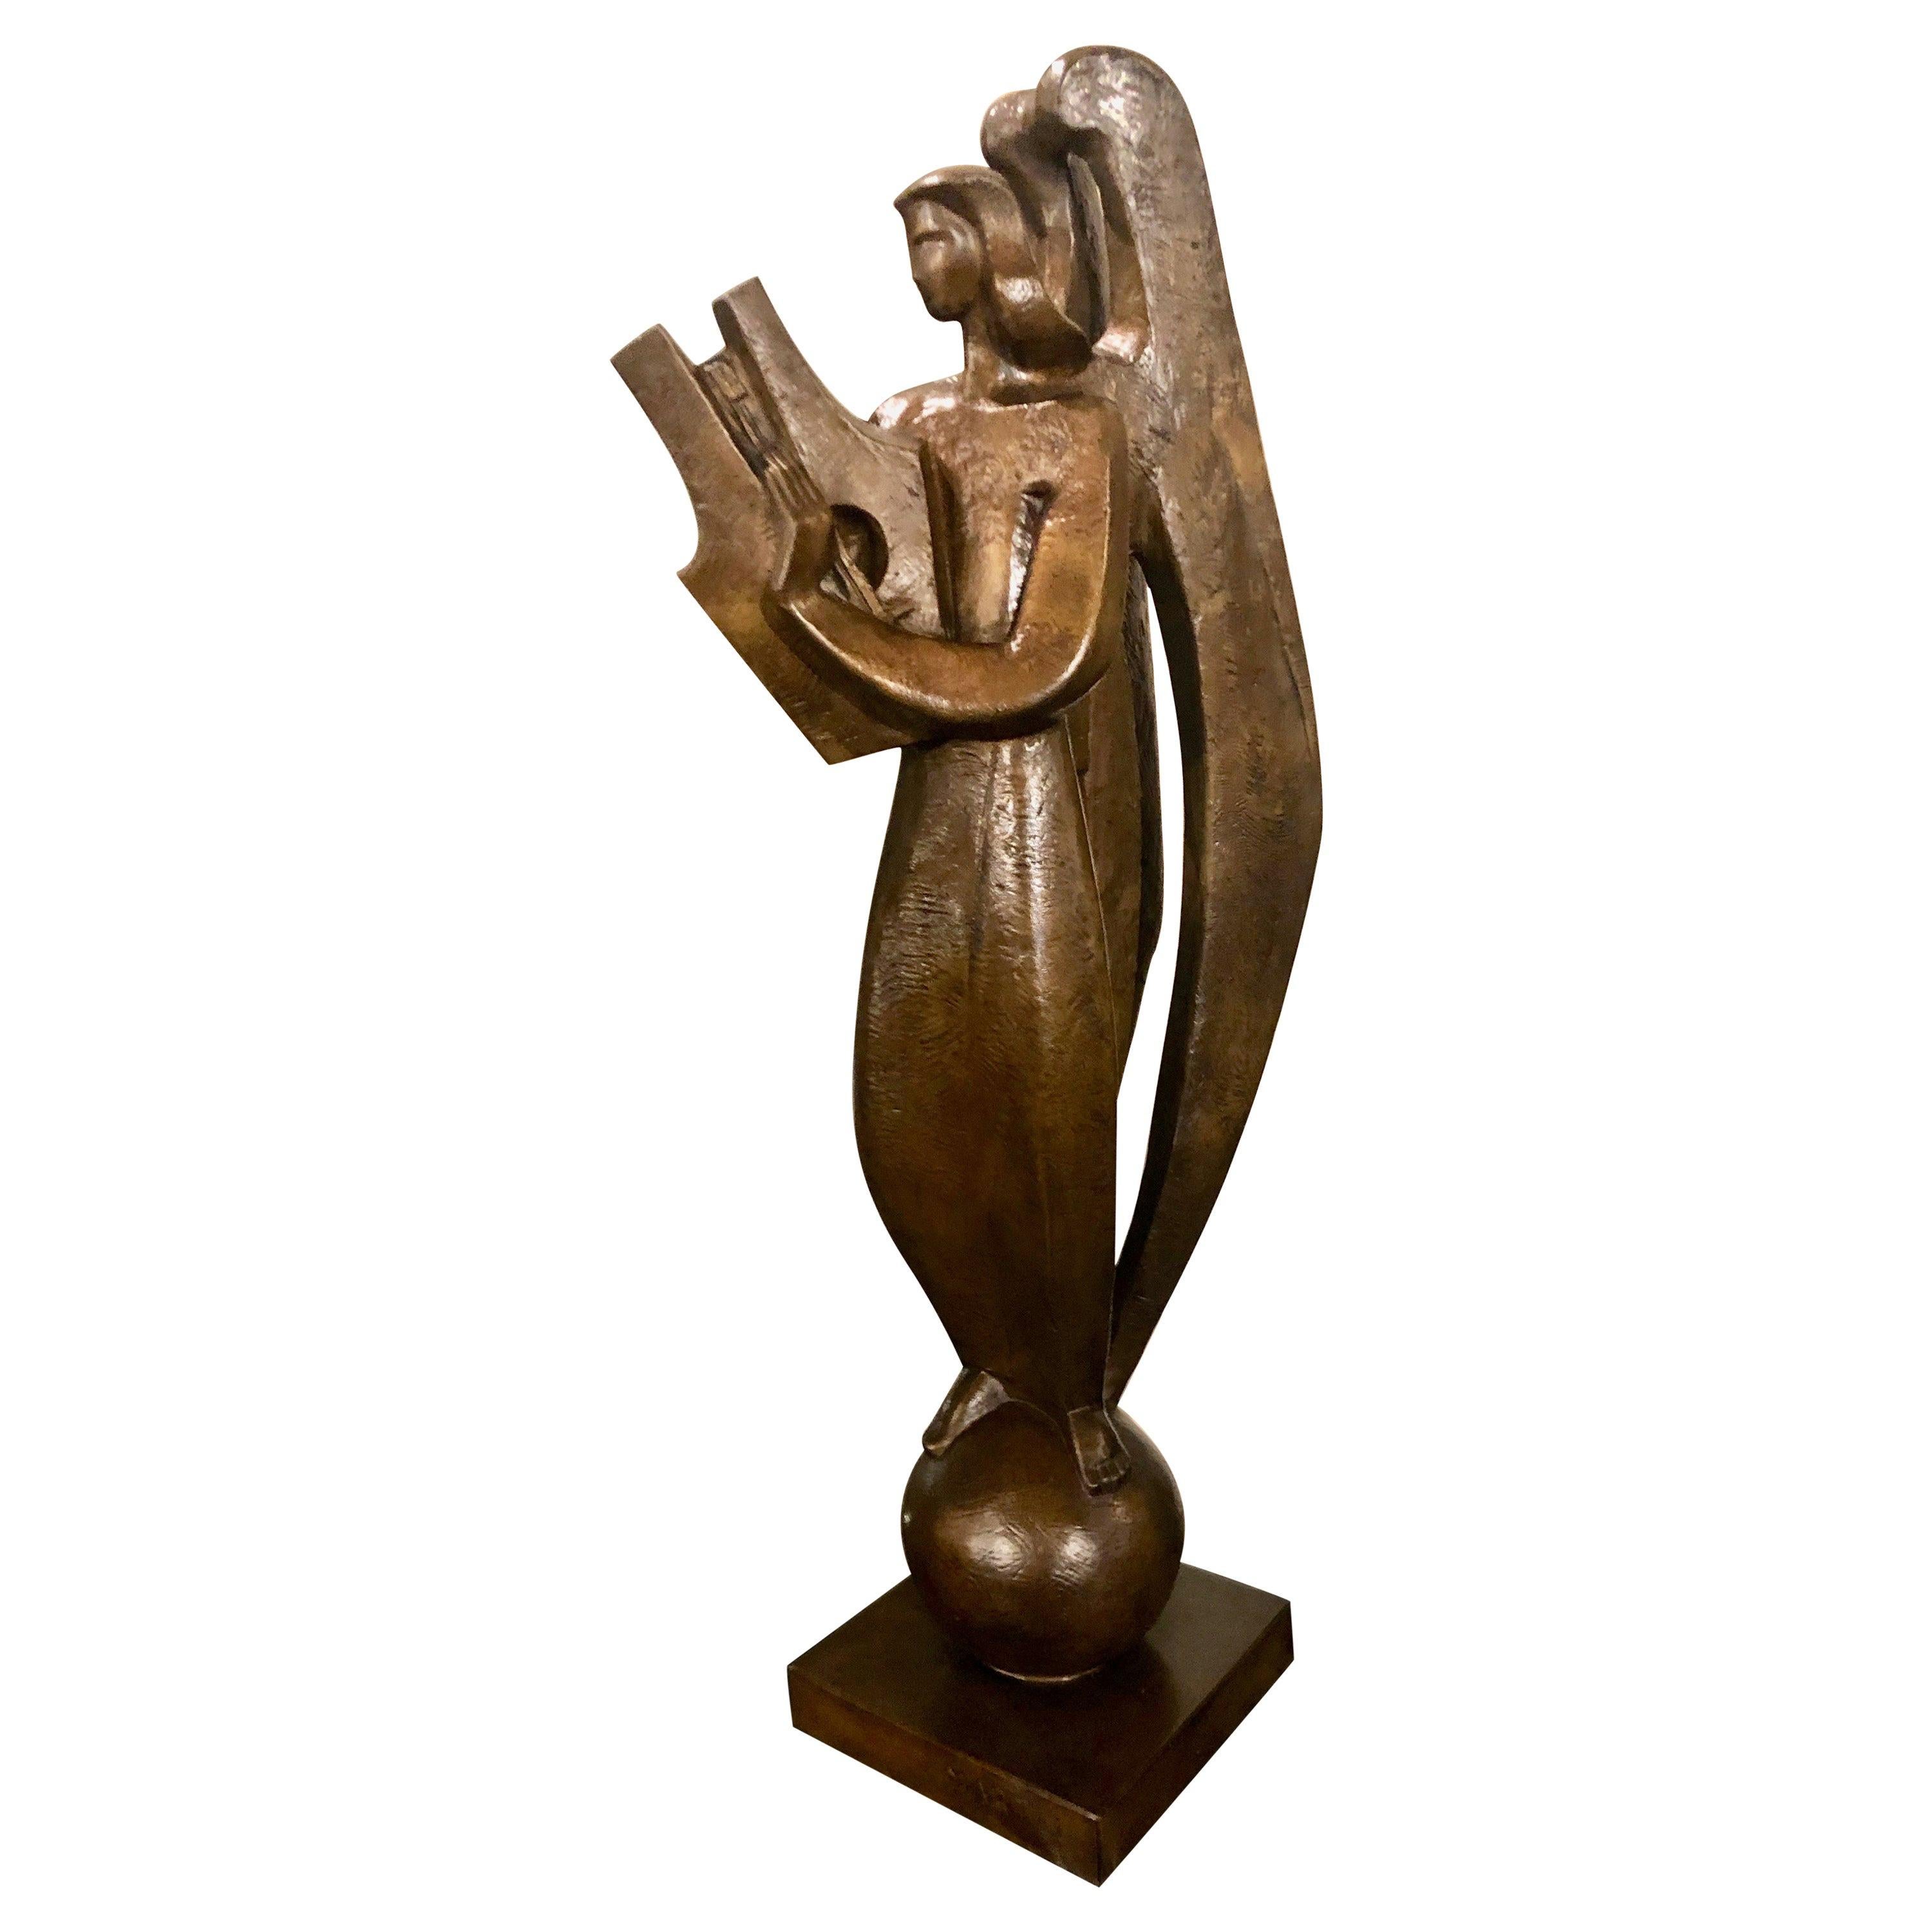 Original bronze by Jan and Joel Martel. Image of a stylized cubist Angel playing a harp.. Rare and famous figurative bronze made by Susse Frères foundry cast posthumously from the original with permission of the family in 2002. Signed: 